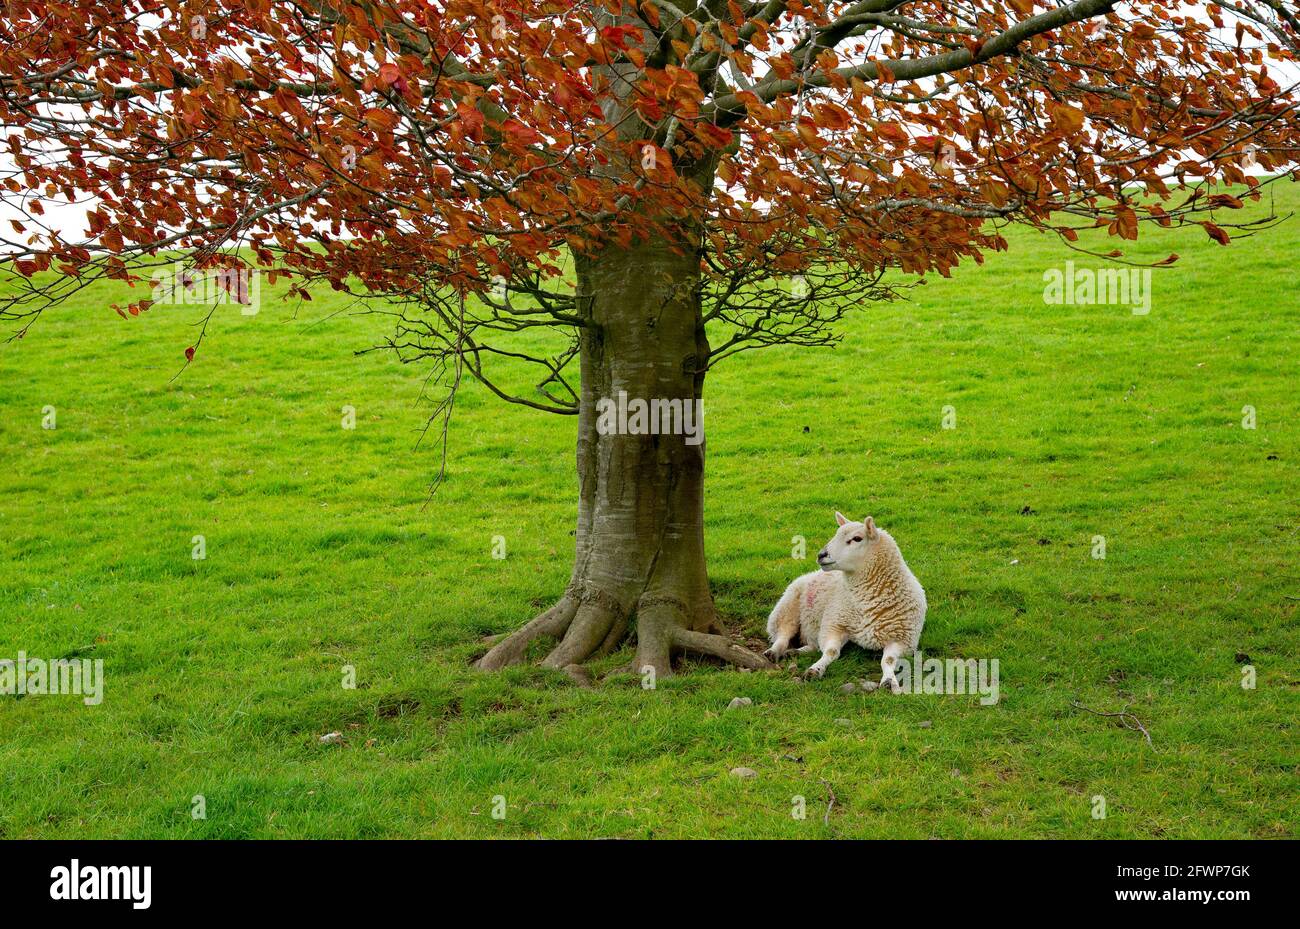 A lamb lying under a red leaved tree, Milnthorpe, Cumbria. UK Stock Photo